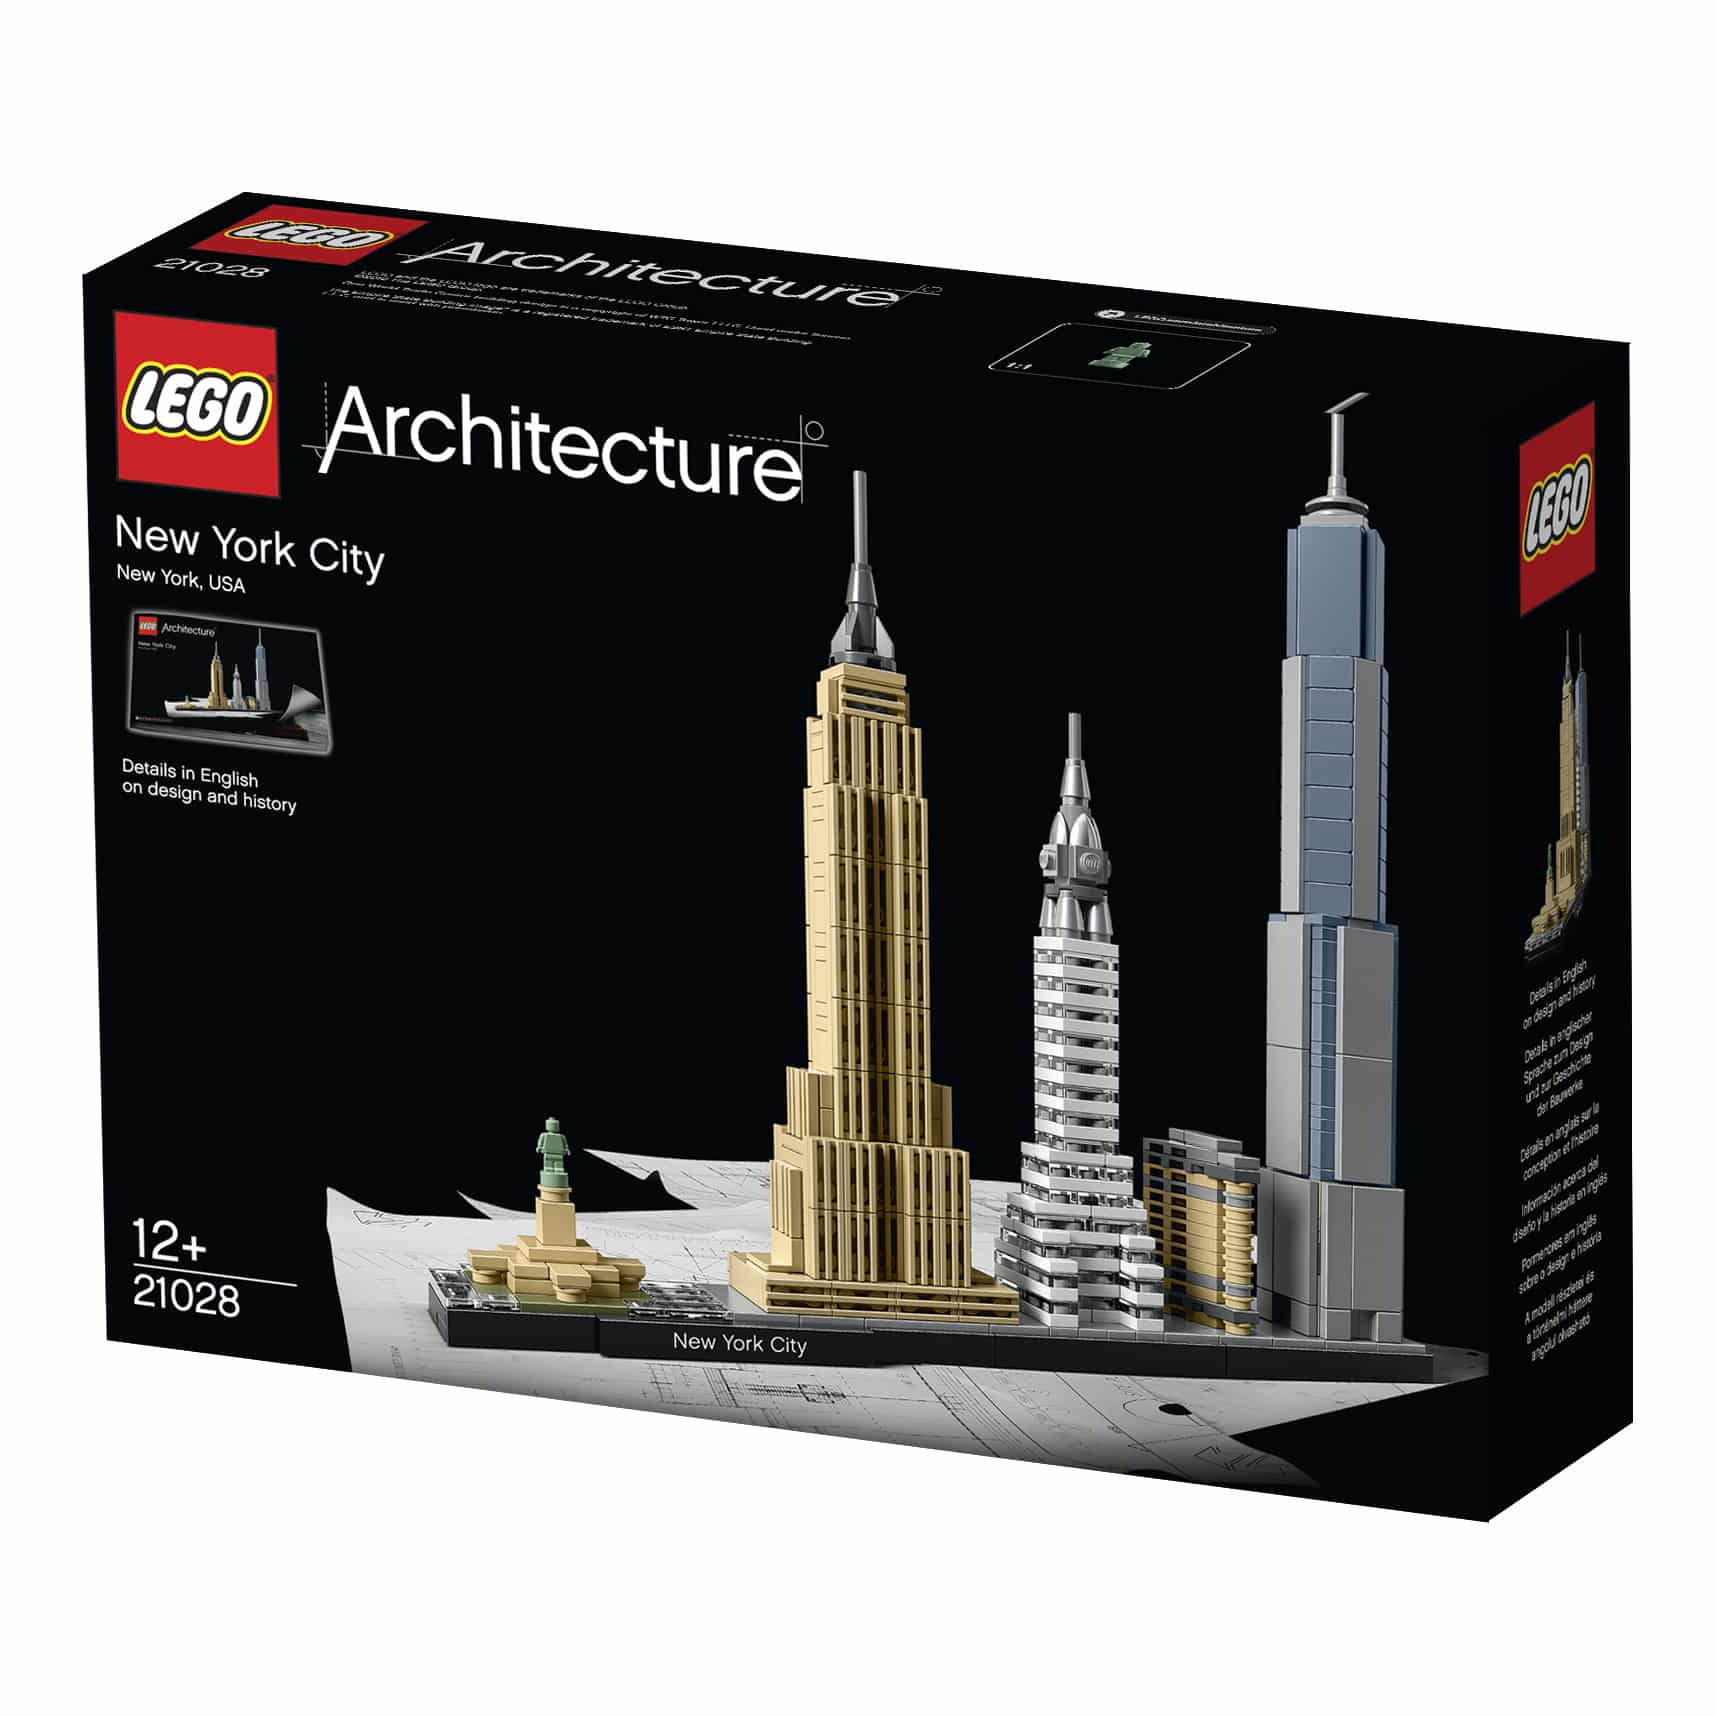 Dieses Lego Architecture Set zeigt die Skyline von New York City. Bildquelle: ©2022 The LEGO Group. All rights reserved. LEGO and the LEGO logo are trademarks and/or copyrights of the LEGO Group.